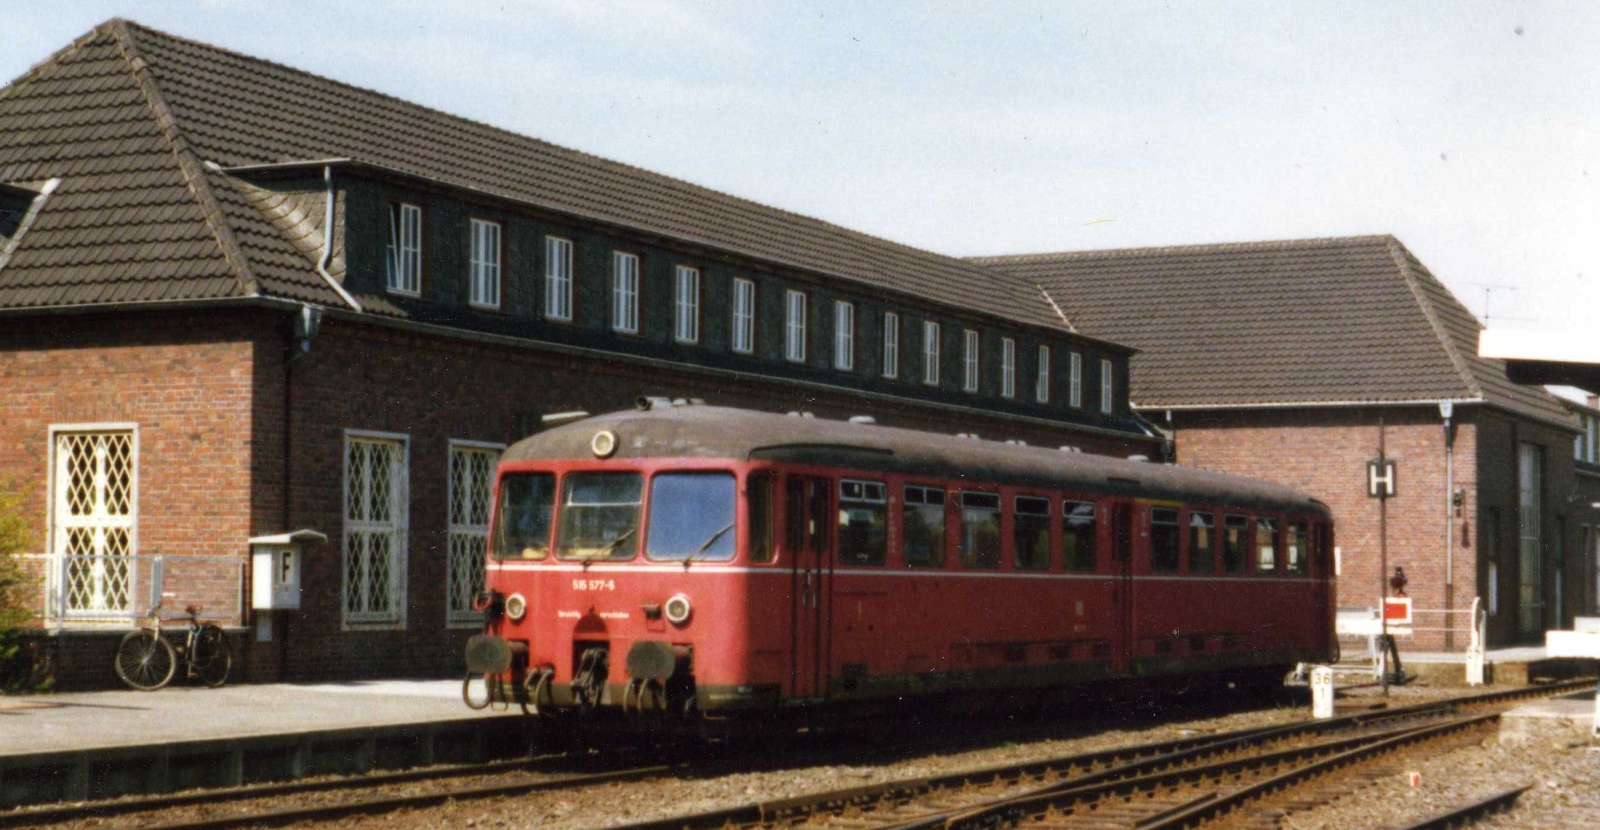 515 577 without a control car in April 1979 in Jülich